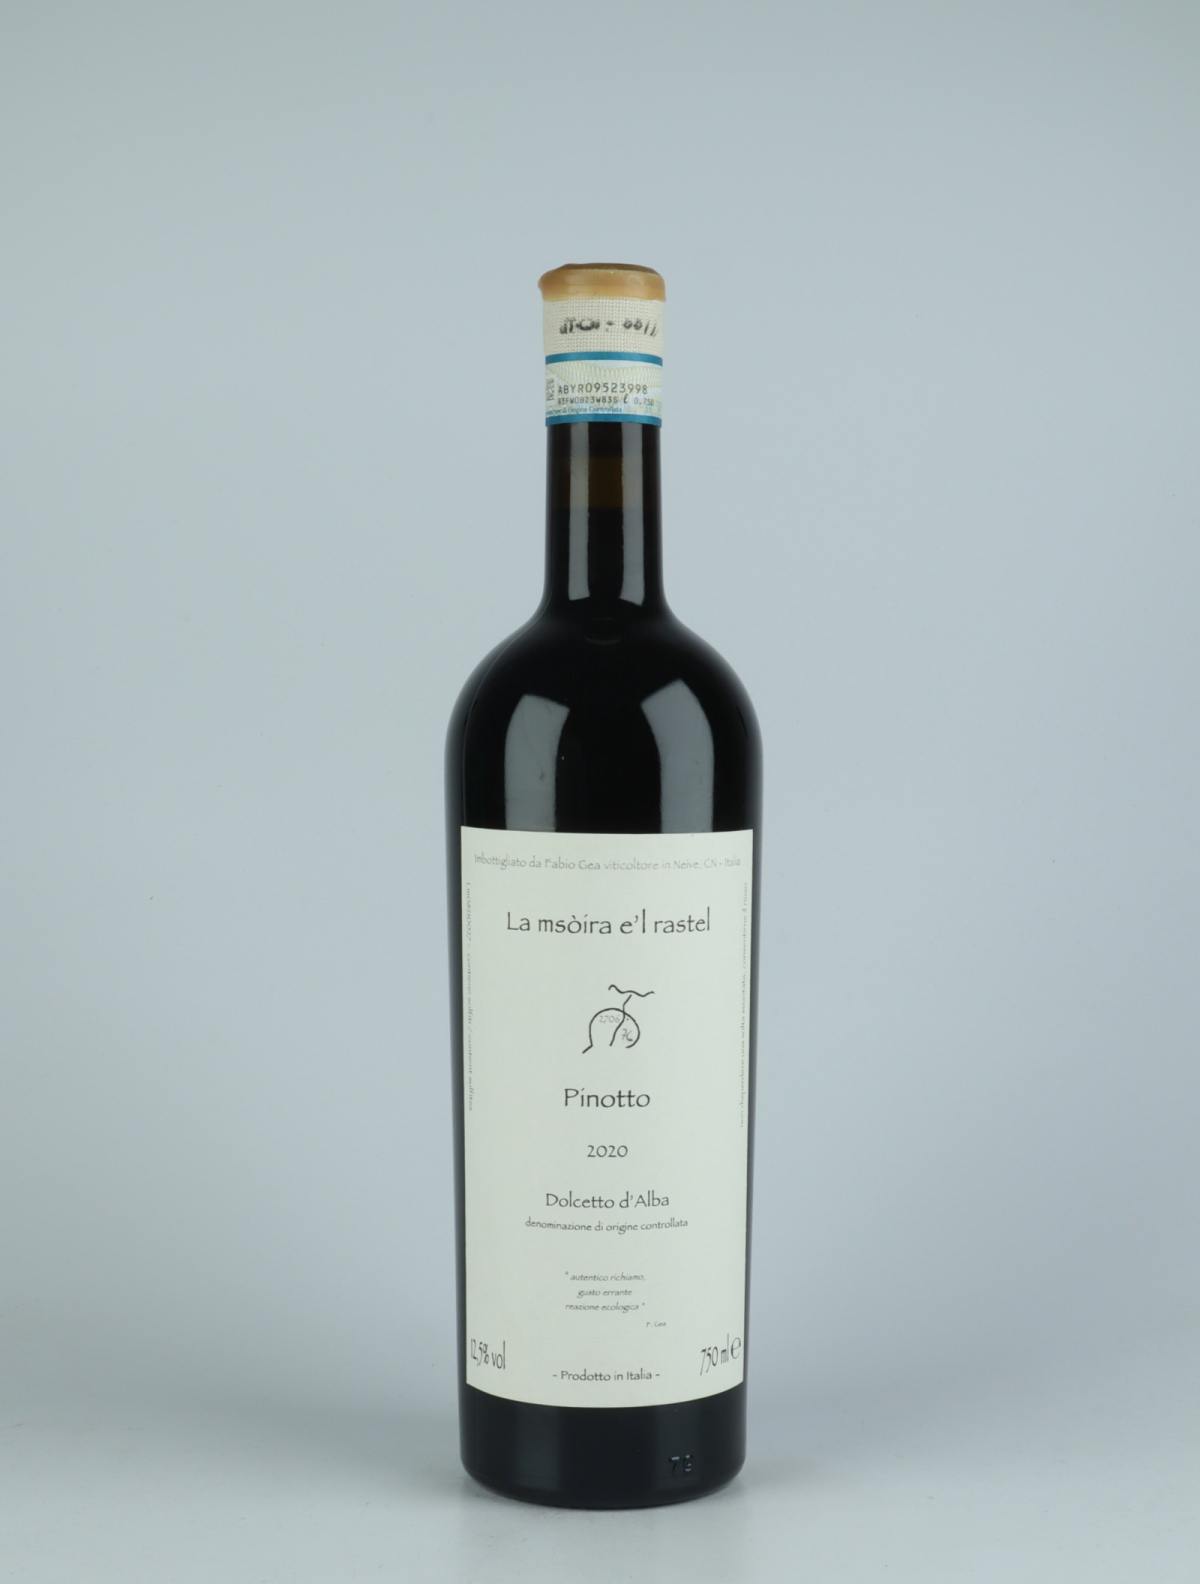 A bottle 2020 Pinotto - Dolcetto d'Alba Red wine from Fabio Gea, Piedmont in Italy